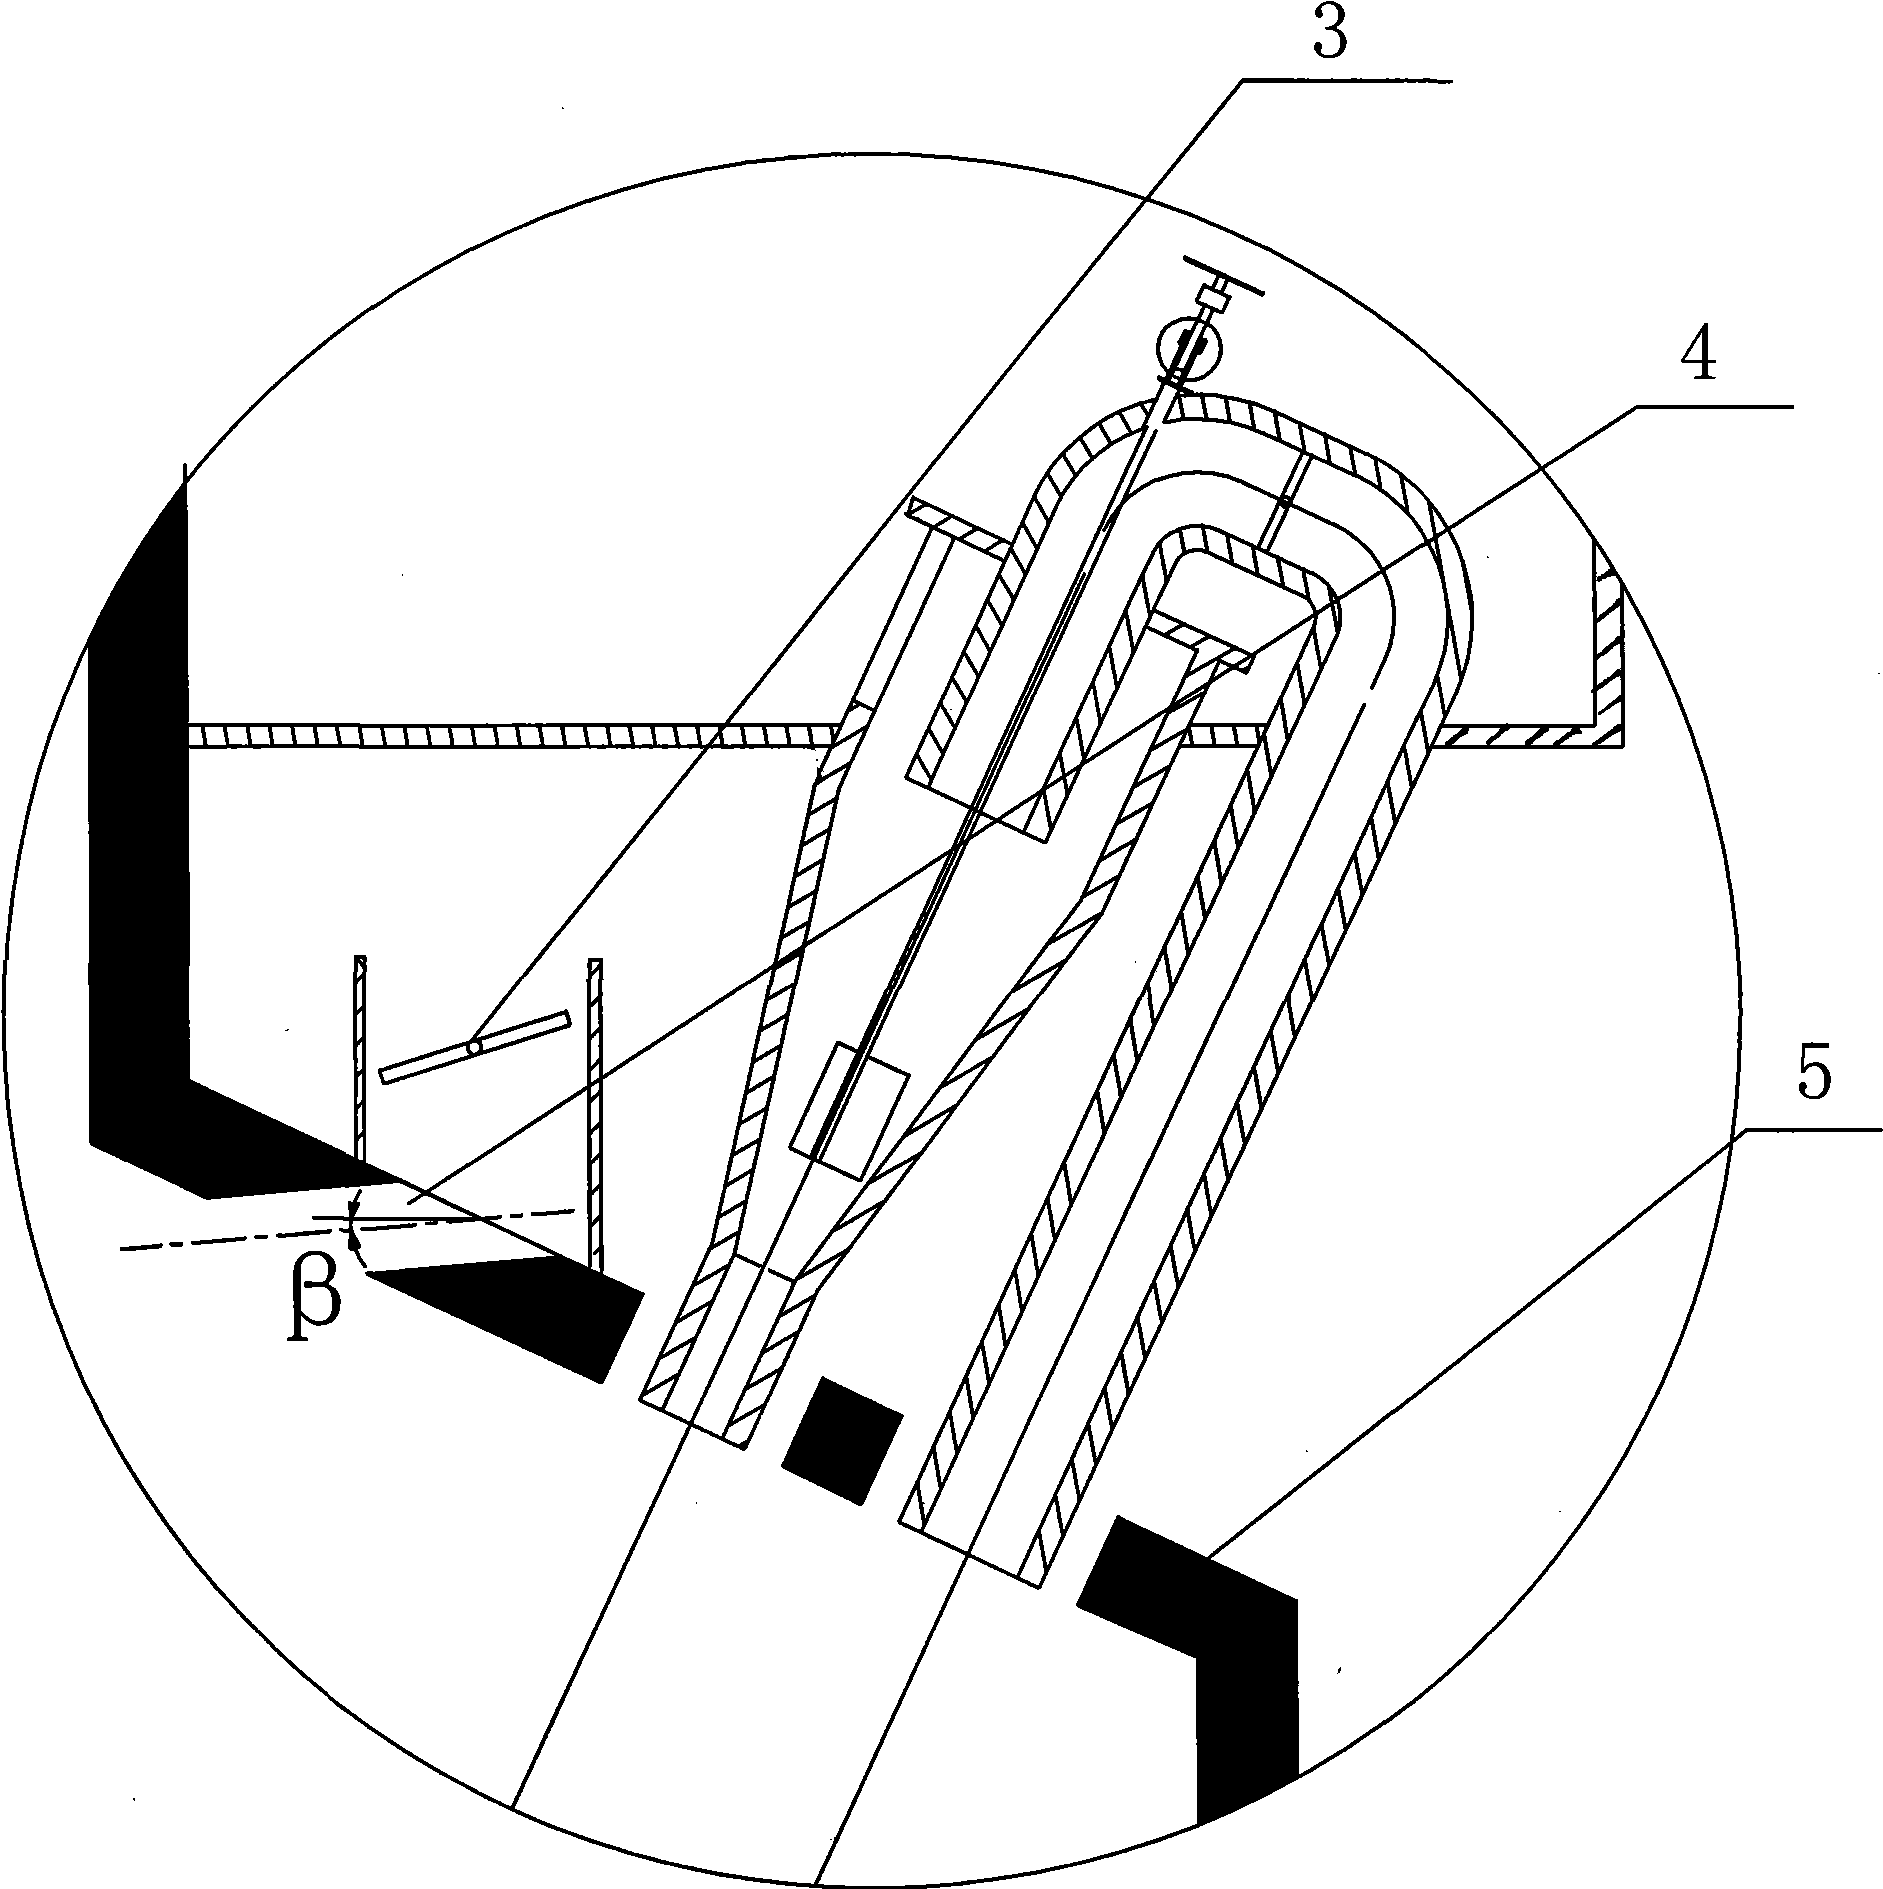 W-shaped flame boiler with two-stage over-fire wind